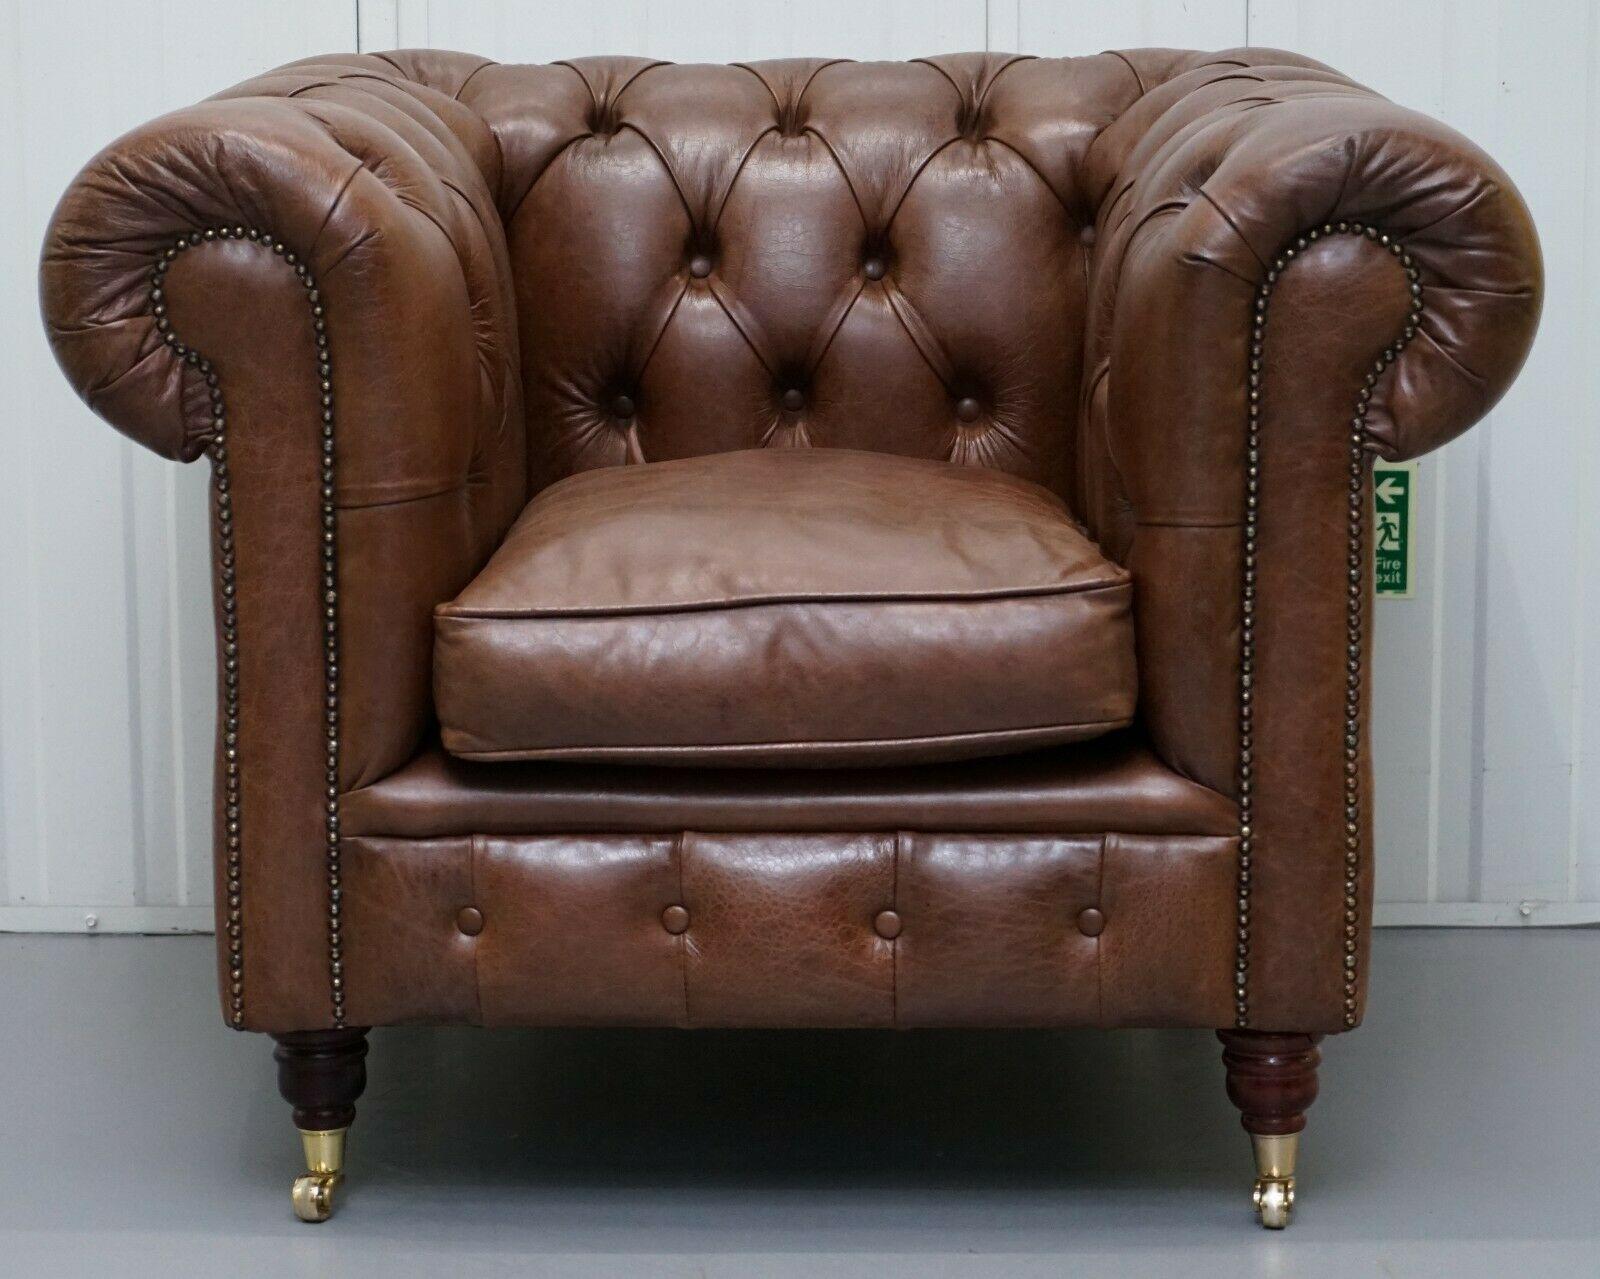 We are delighted to offer for this stunning Heritage brown leather Chesterfield armchair

This armchair is part of a suite, this listing is for the chair only, I have the matching 3-4-seat sofa and 2-3-seat sofa listed under my other items